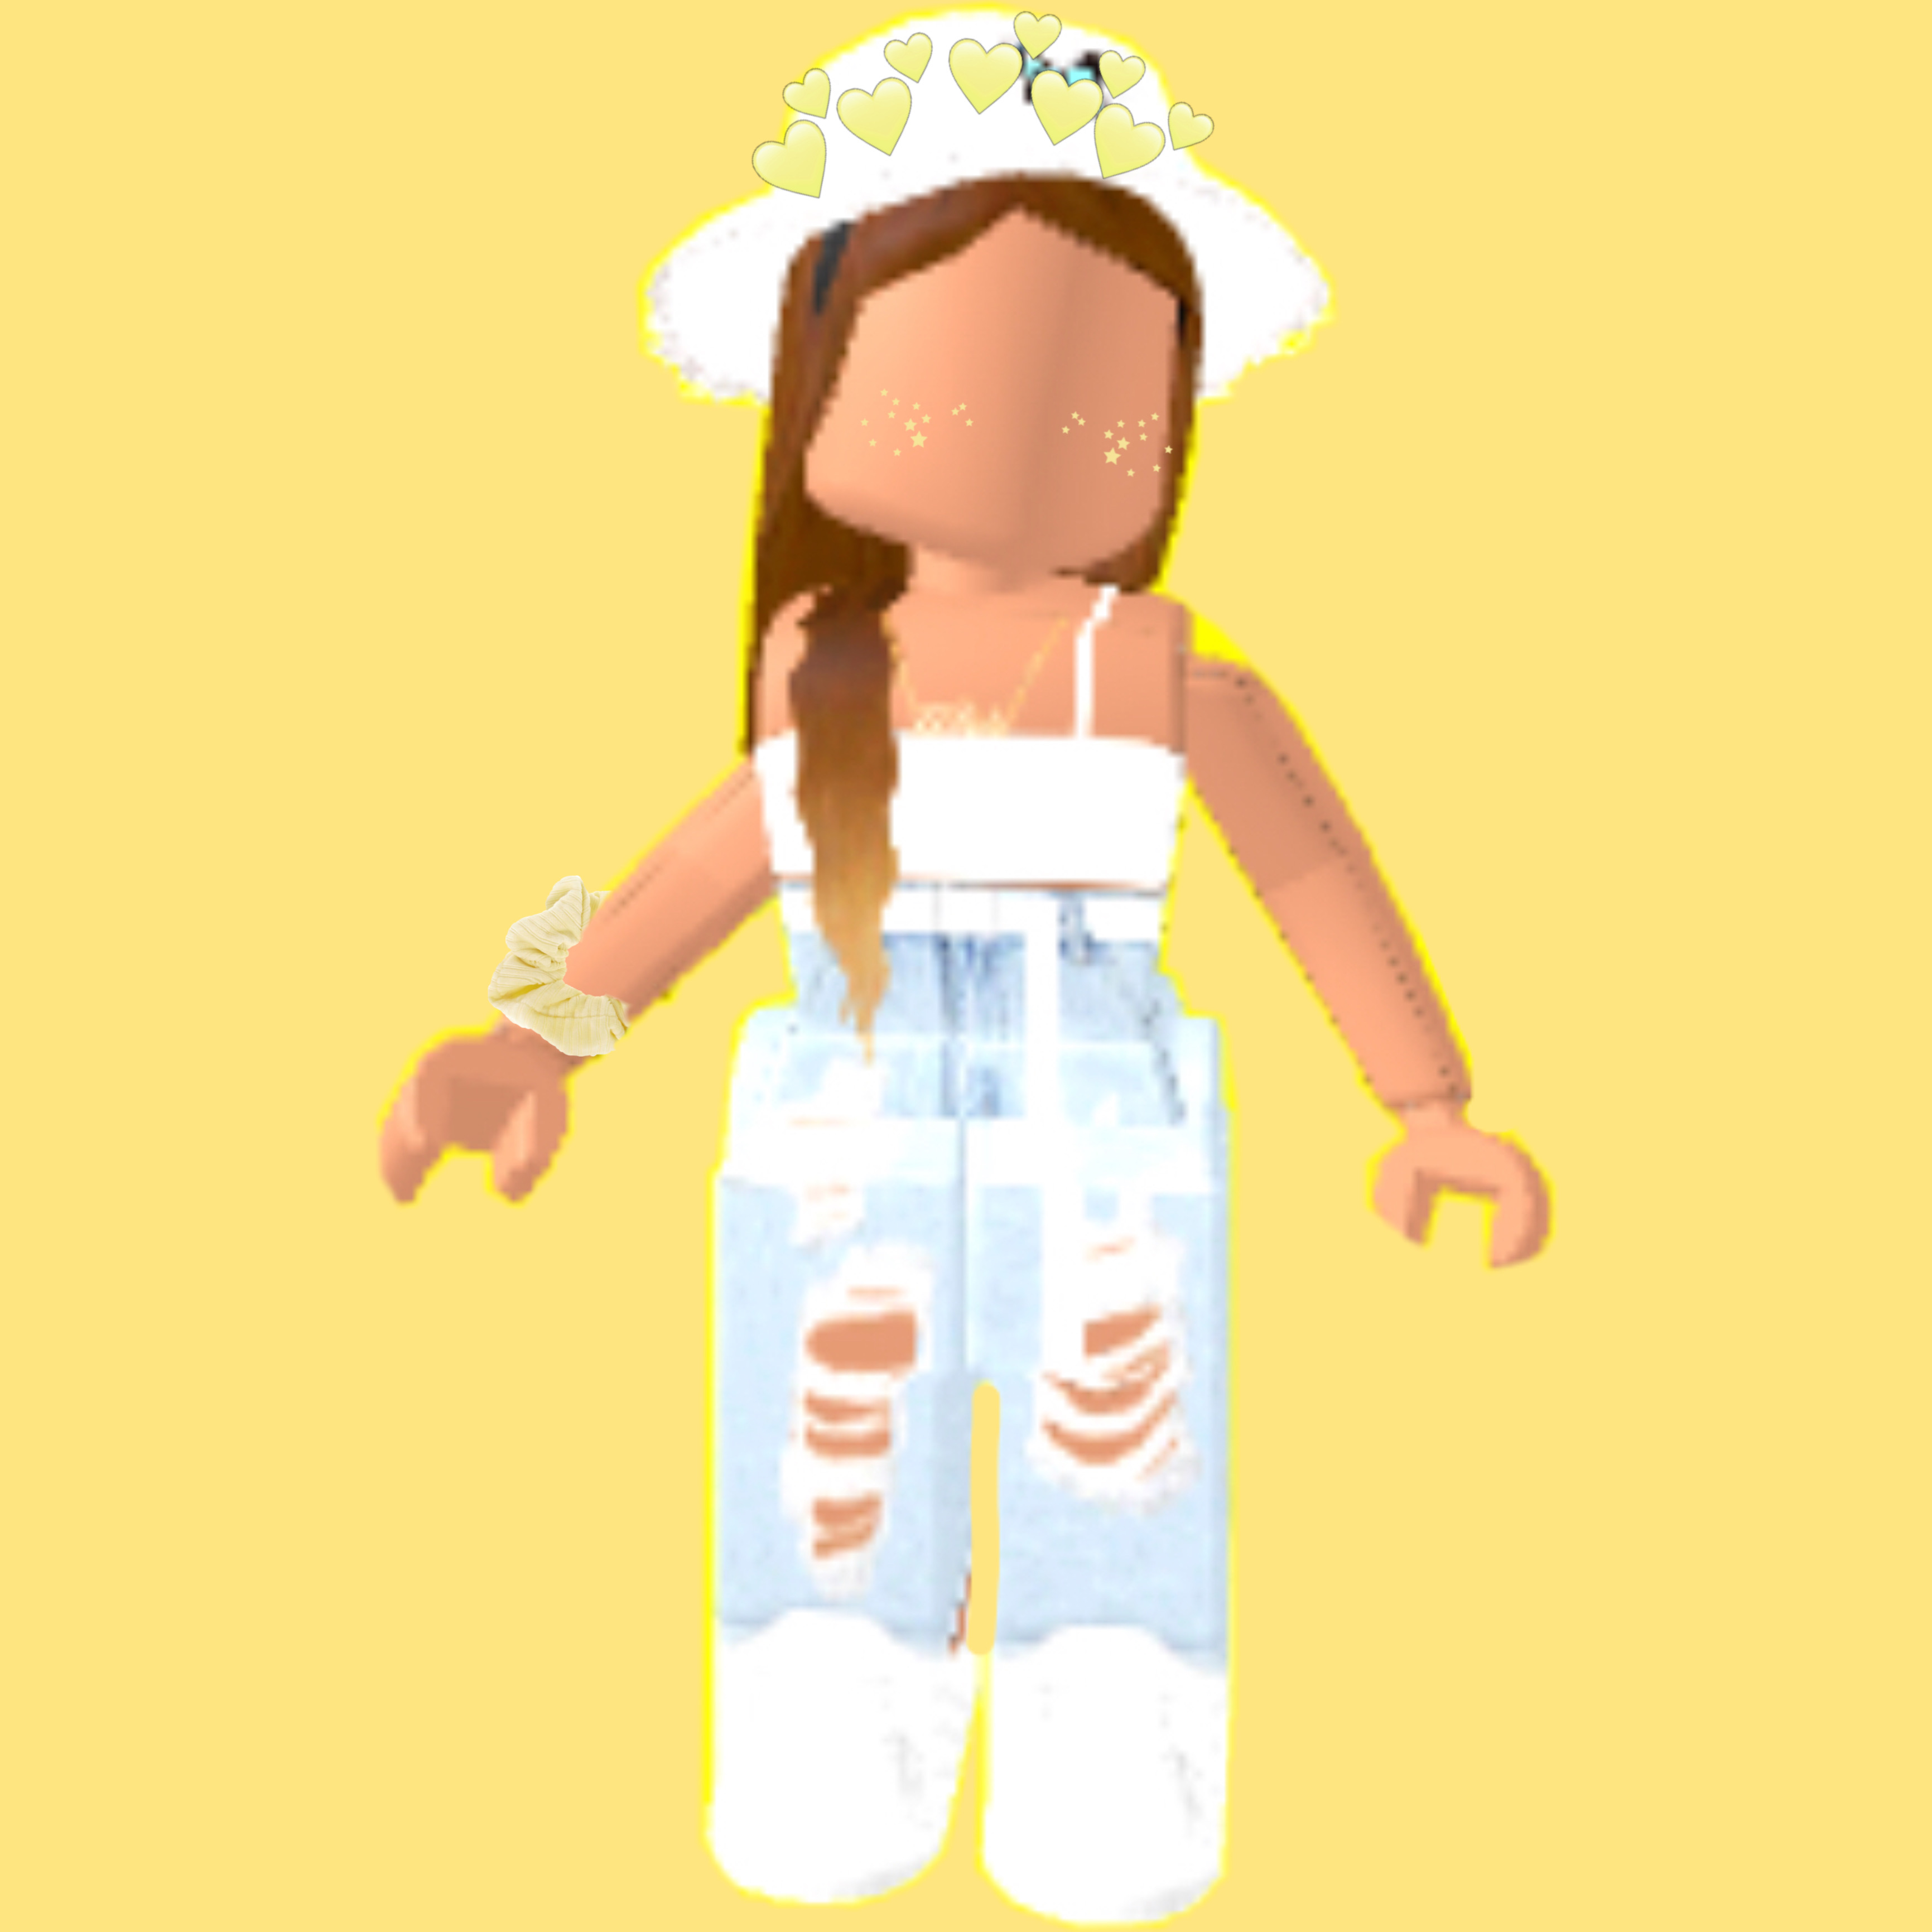 Pastel Gfxroblox Aesthetic Roblox Image By Bella - pastel beautiful aesthetic roblox girl gfx